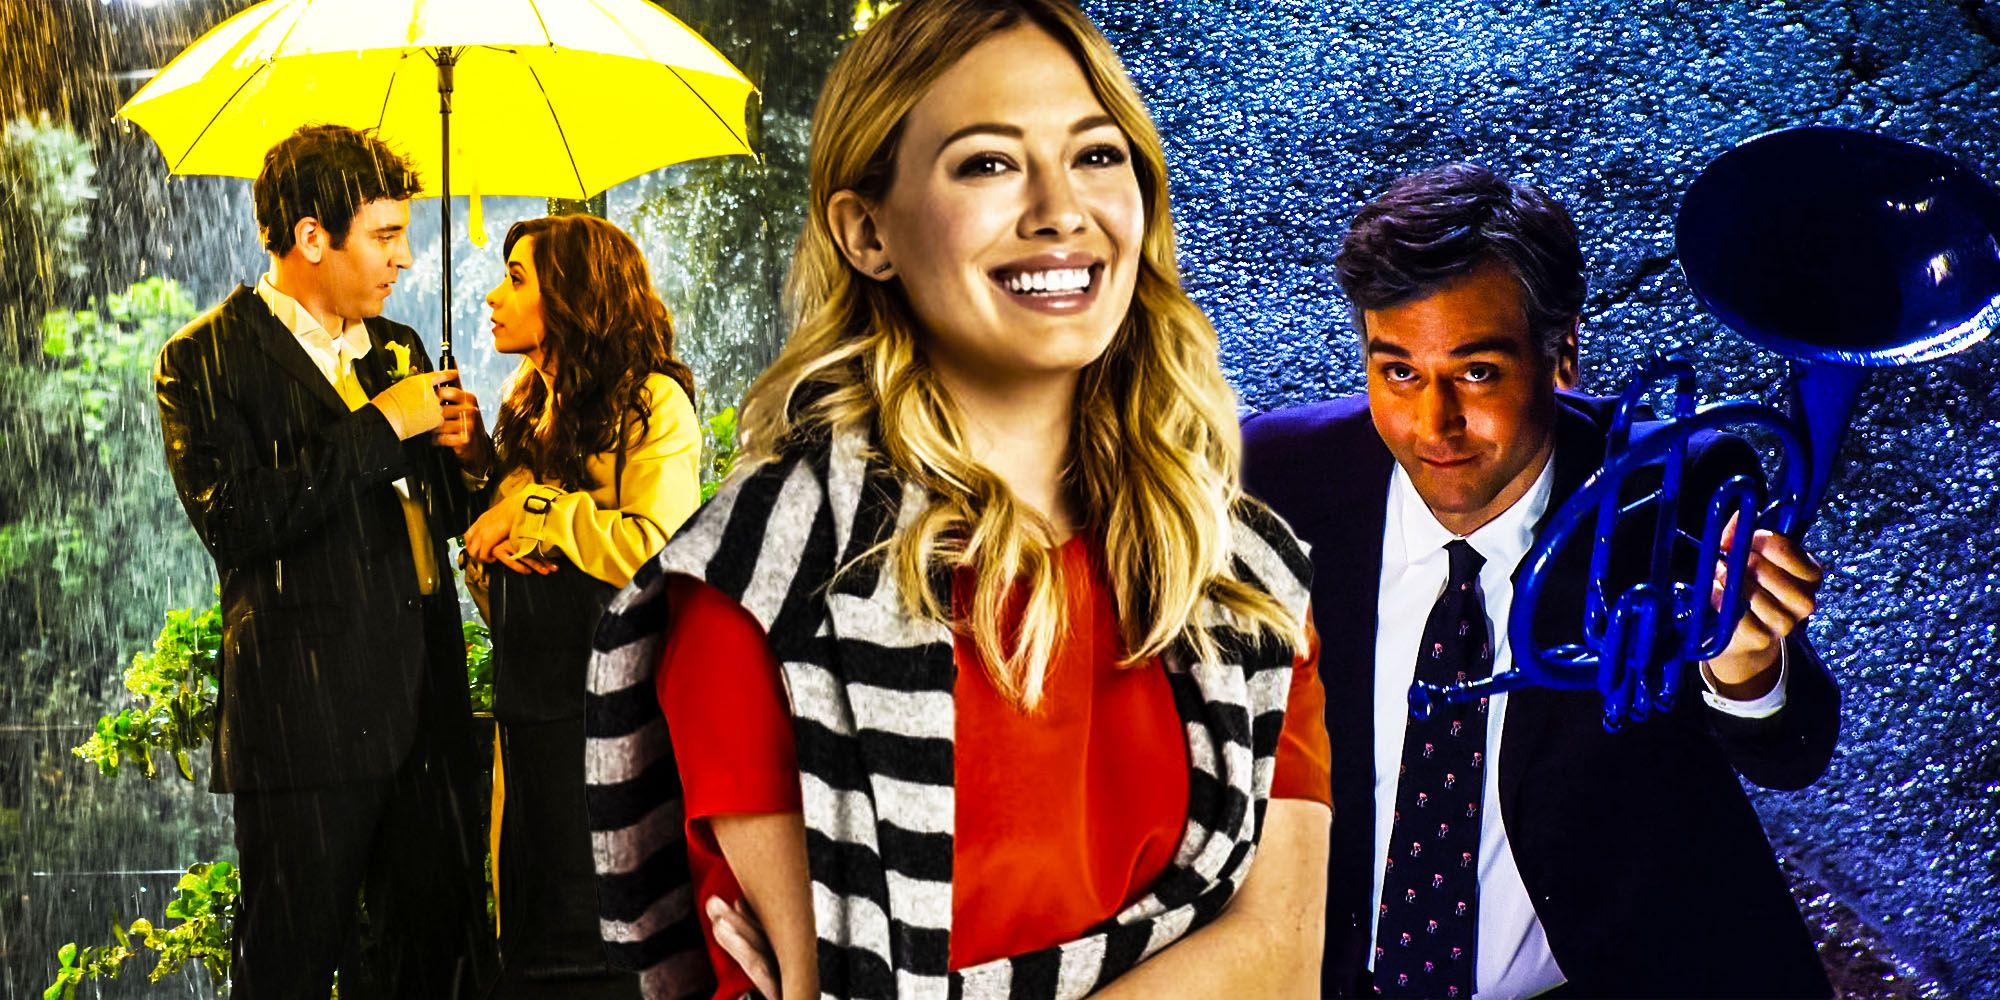 Hilary duff How i met your father has advantage over how i met your mother finale